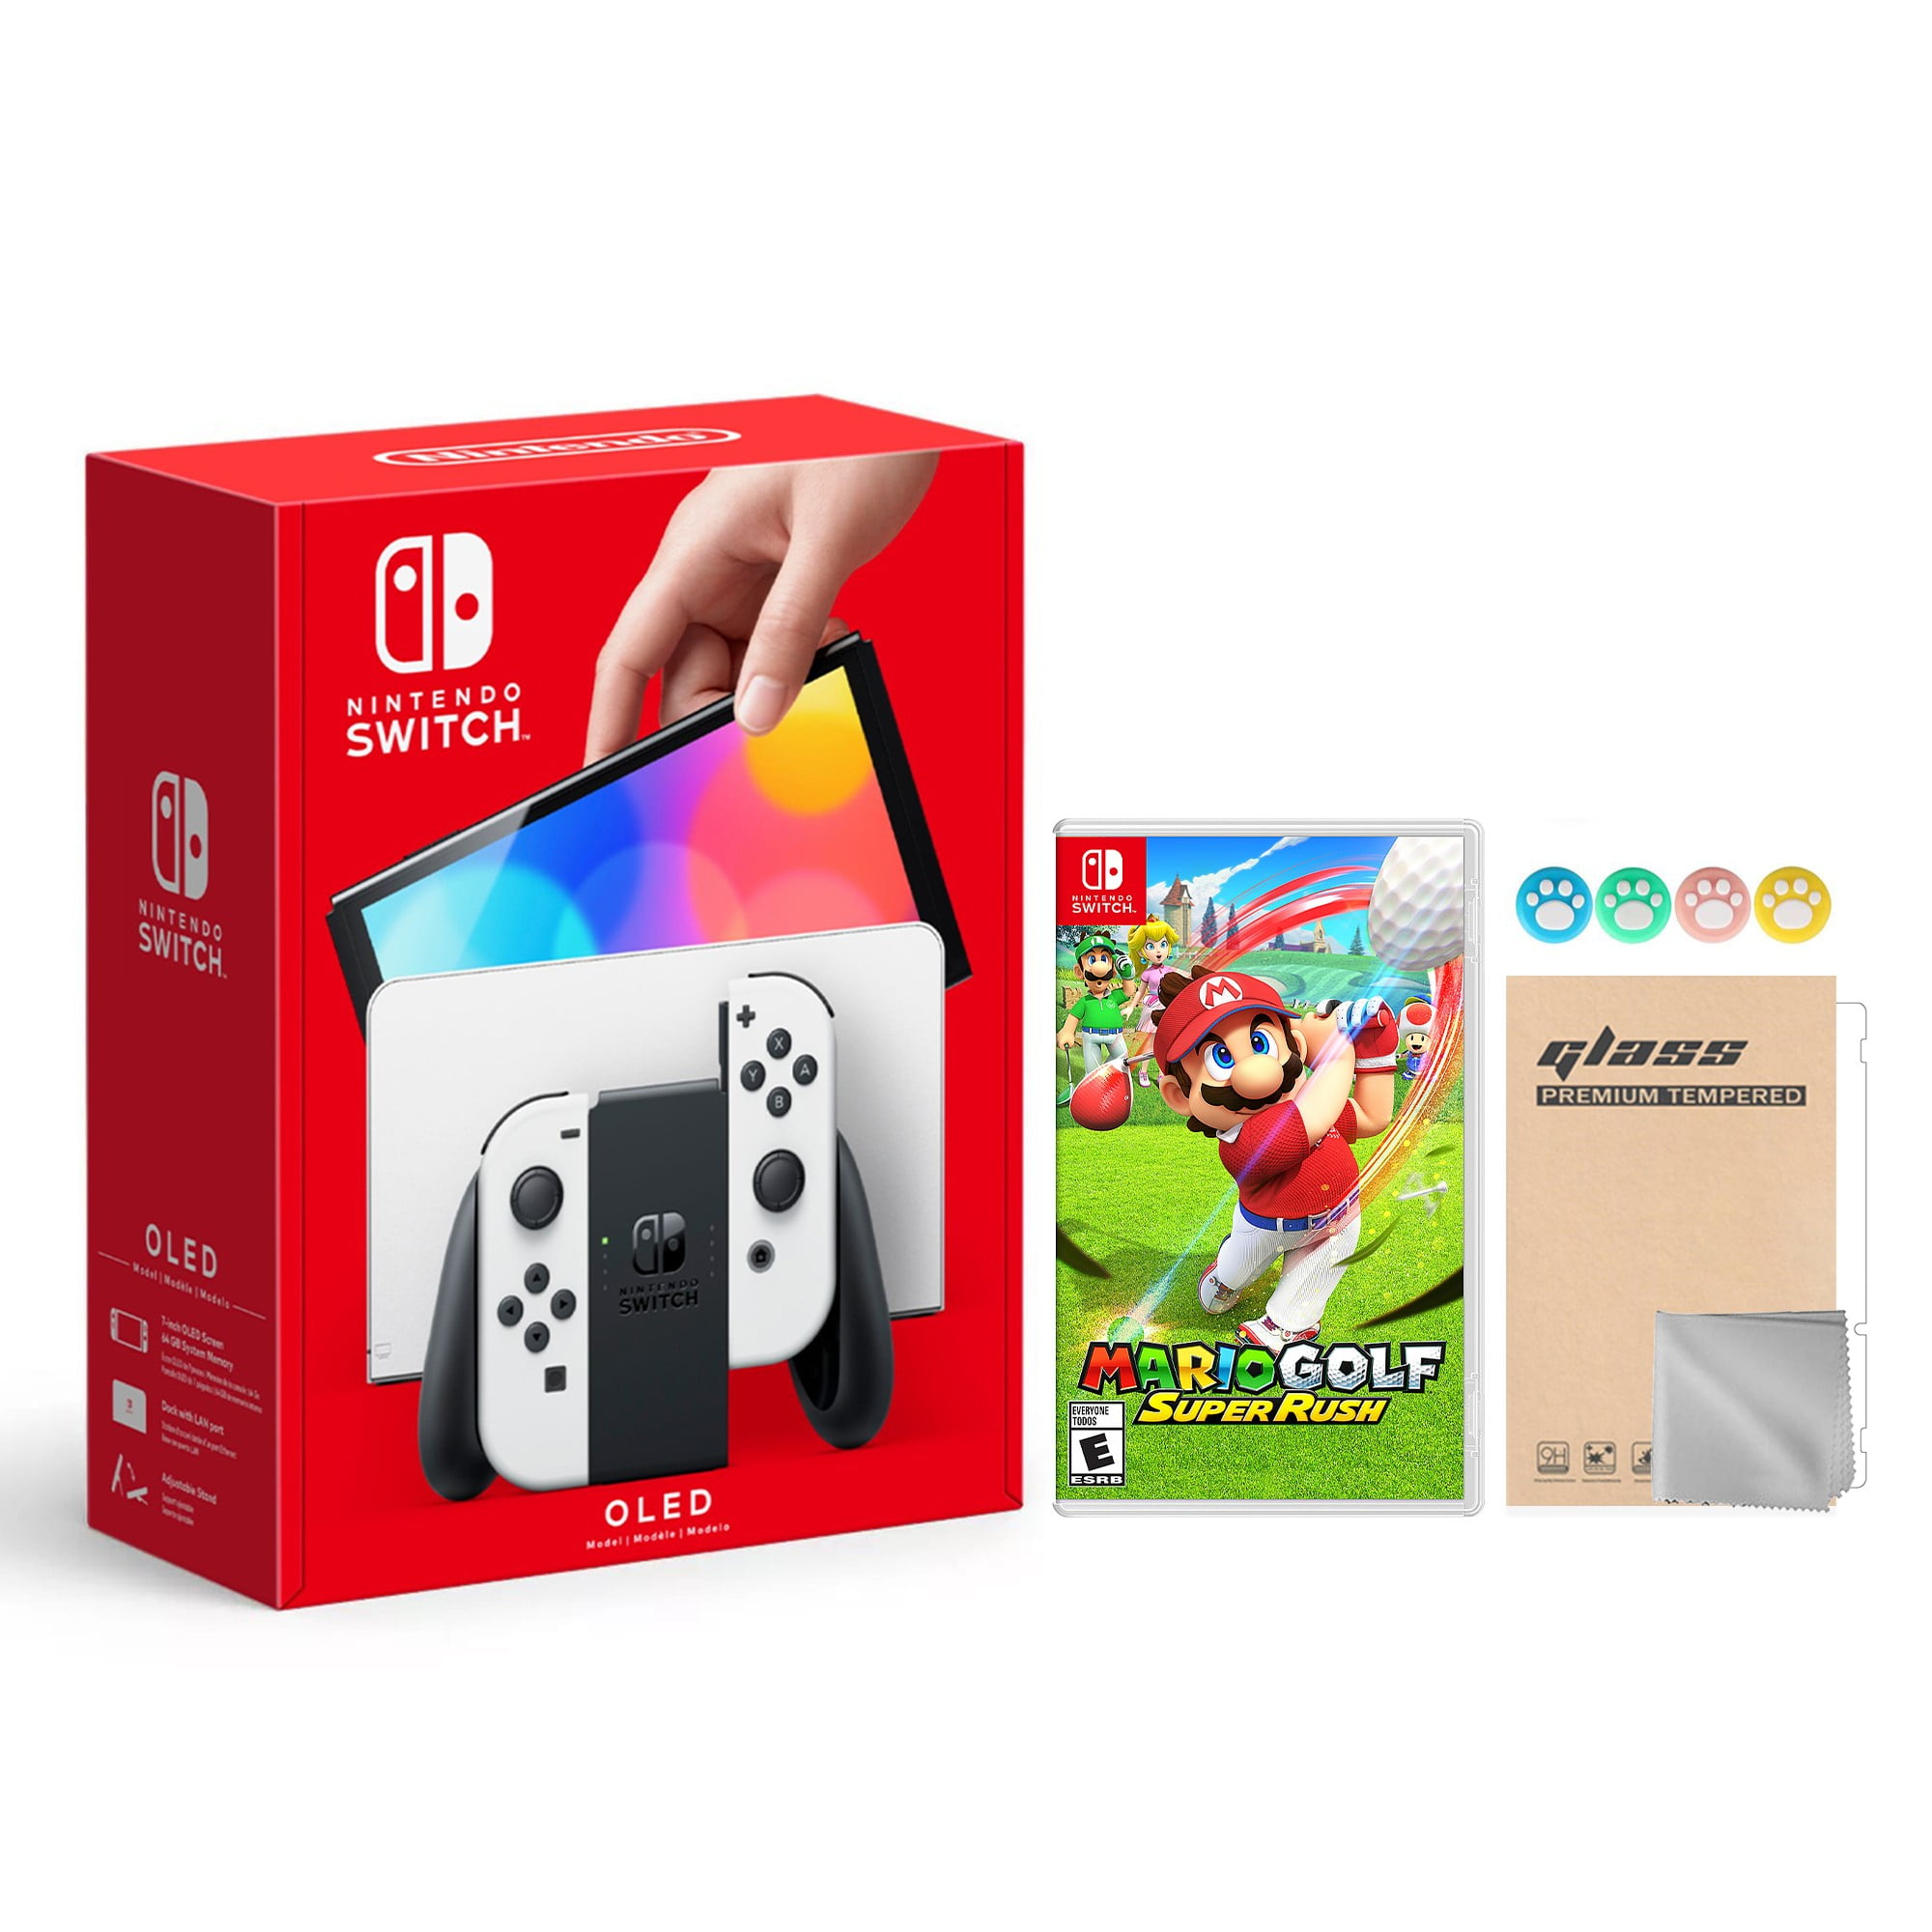 Nintendo Switch Improved & HD White Joy - Skyward Sword with Con Screen Mytrix HD Zelda: The Version And JP Region of - 64GB OLED Accessories Free LAN-Port Model Console Dock Legend